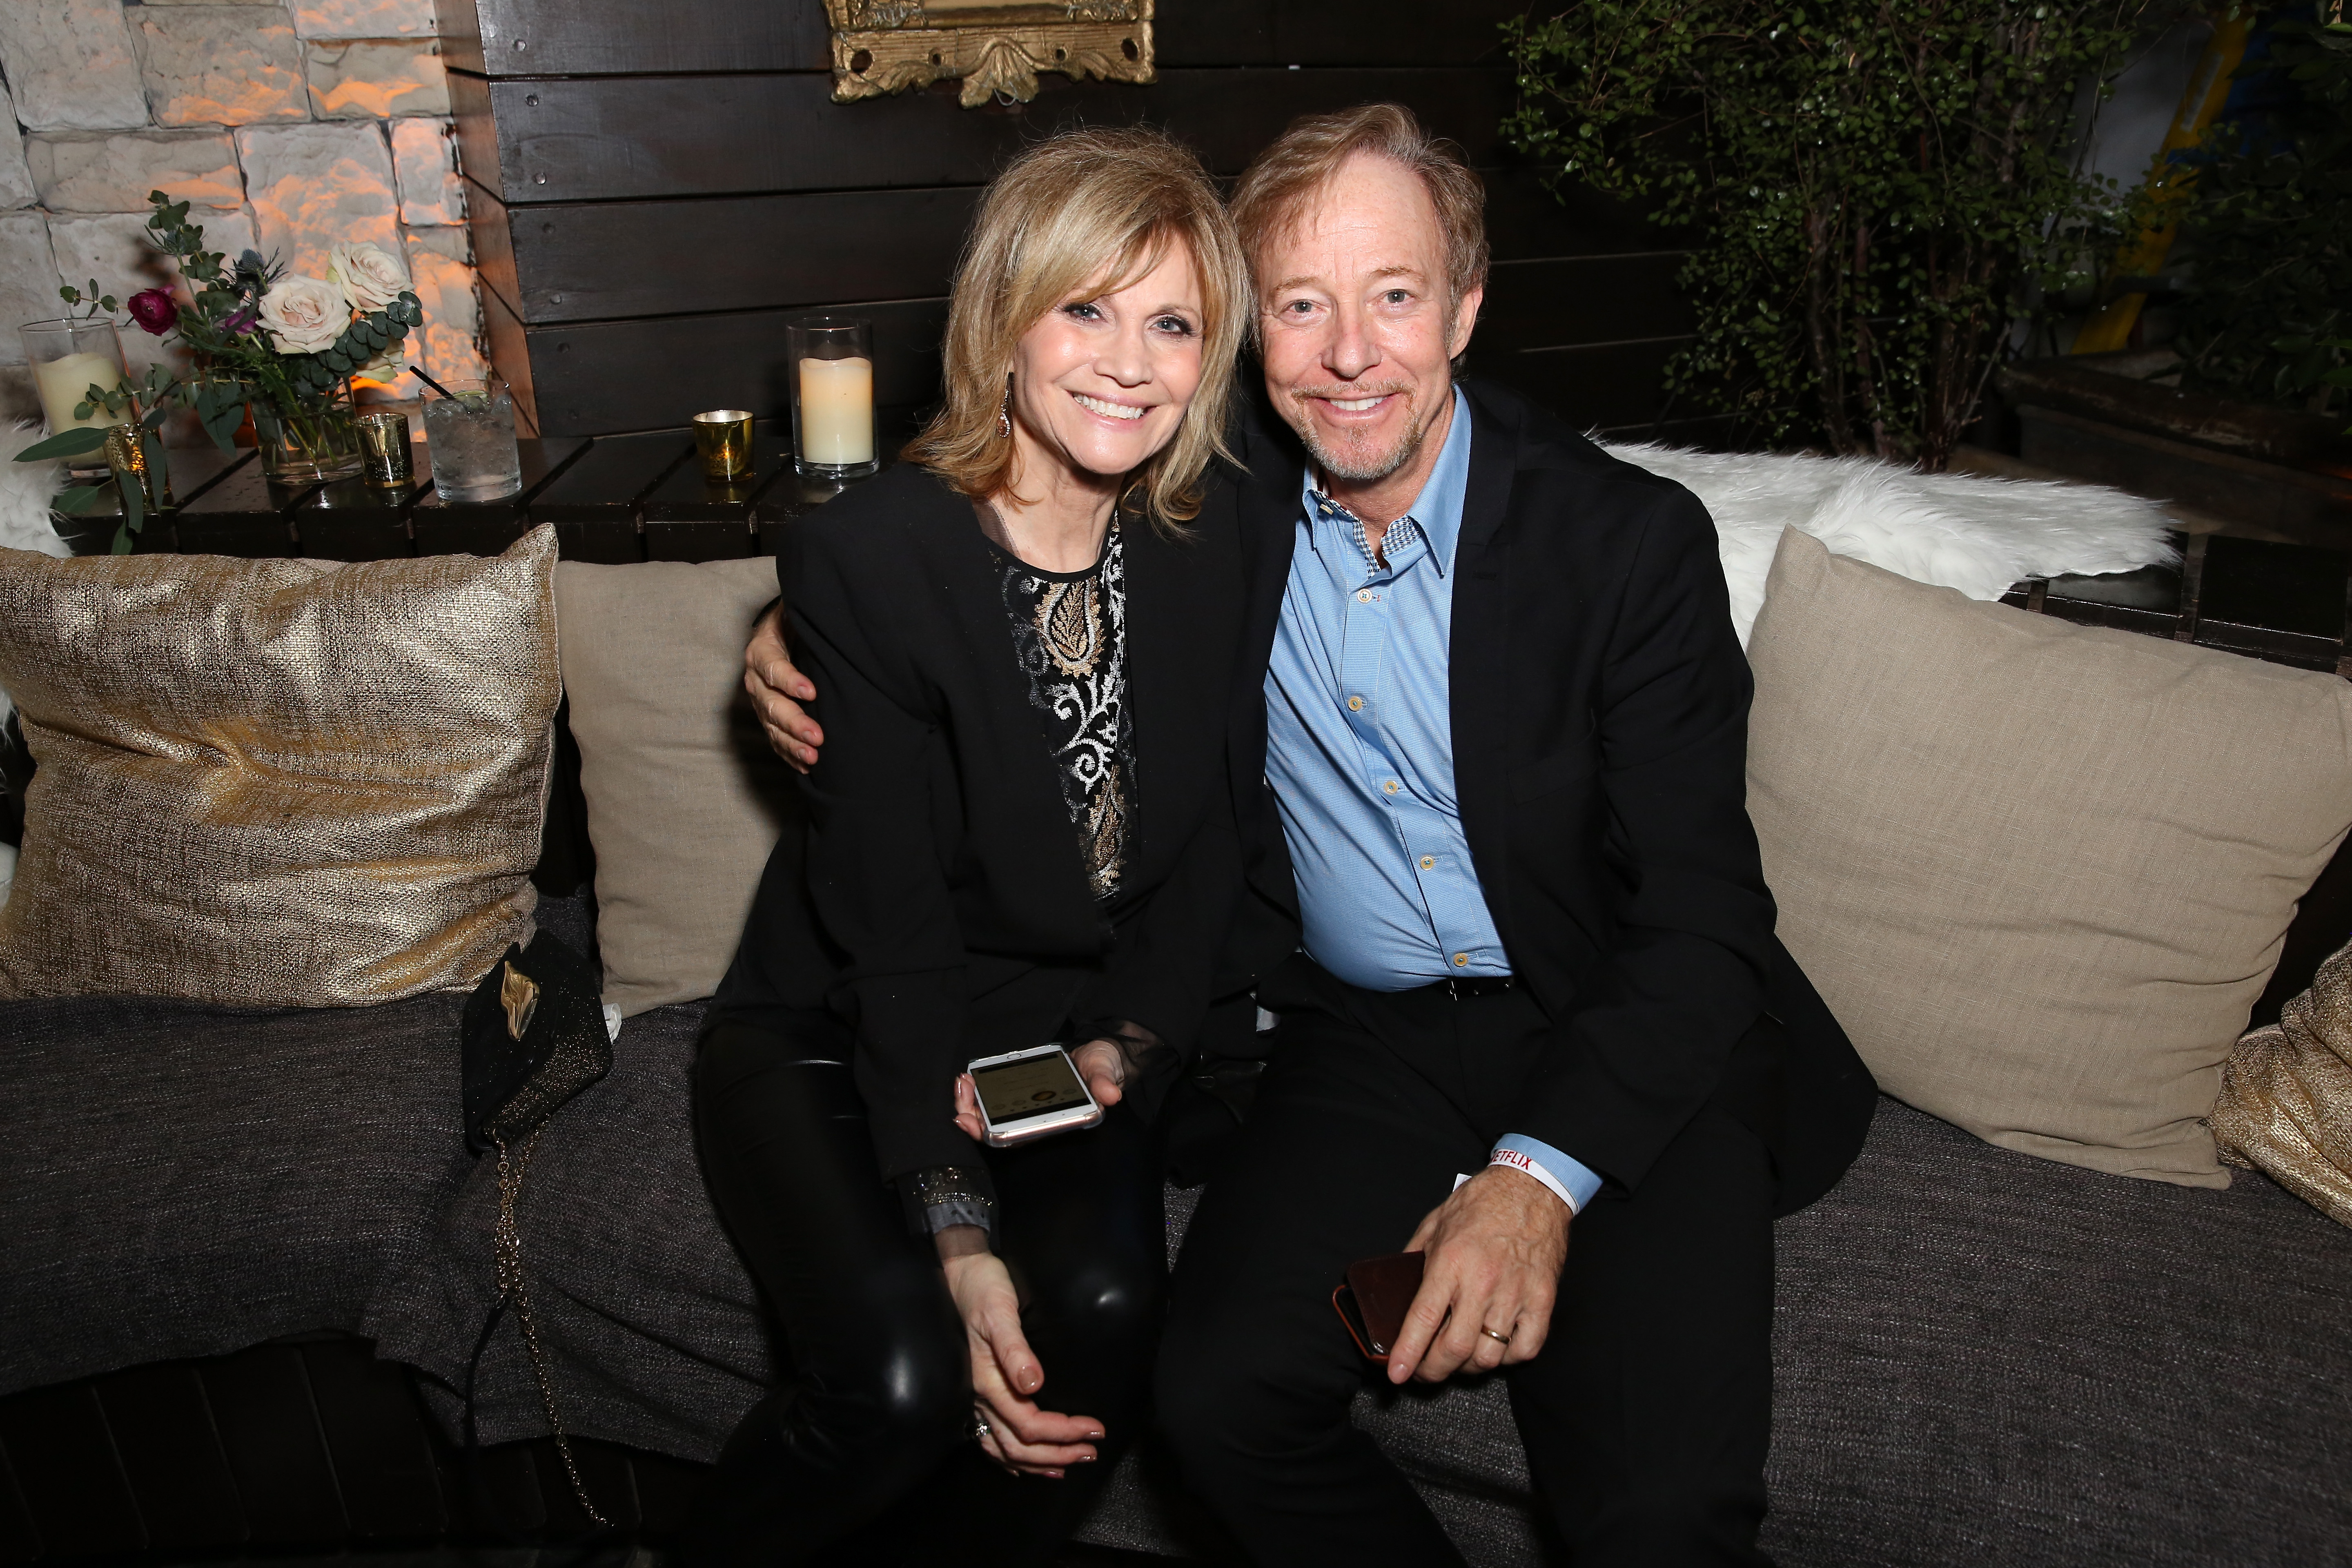 Markie Post and Michael A. Ross pose at the "Santa Clarita Diet" Season 2 World Premiere on March 22, 2018, in Hollywood, California | Source: Getty Images